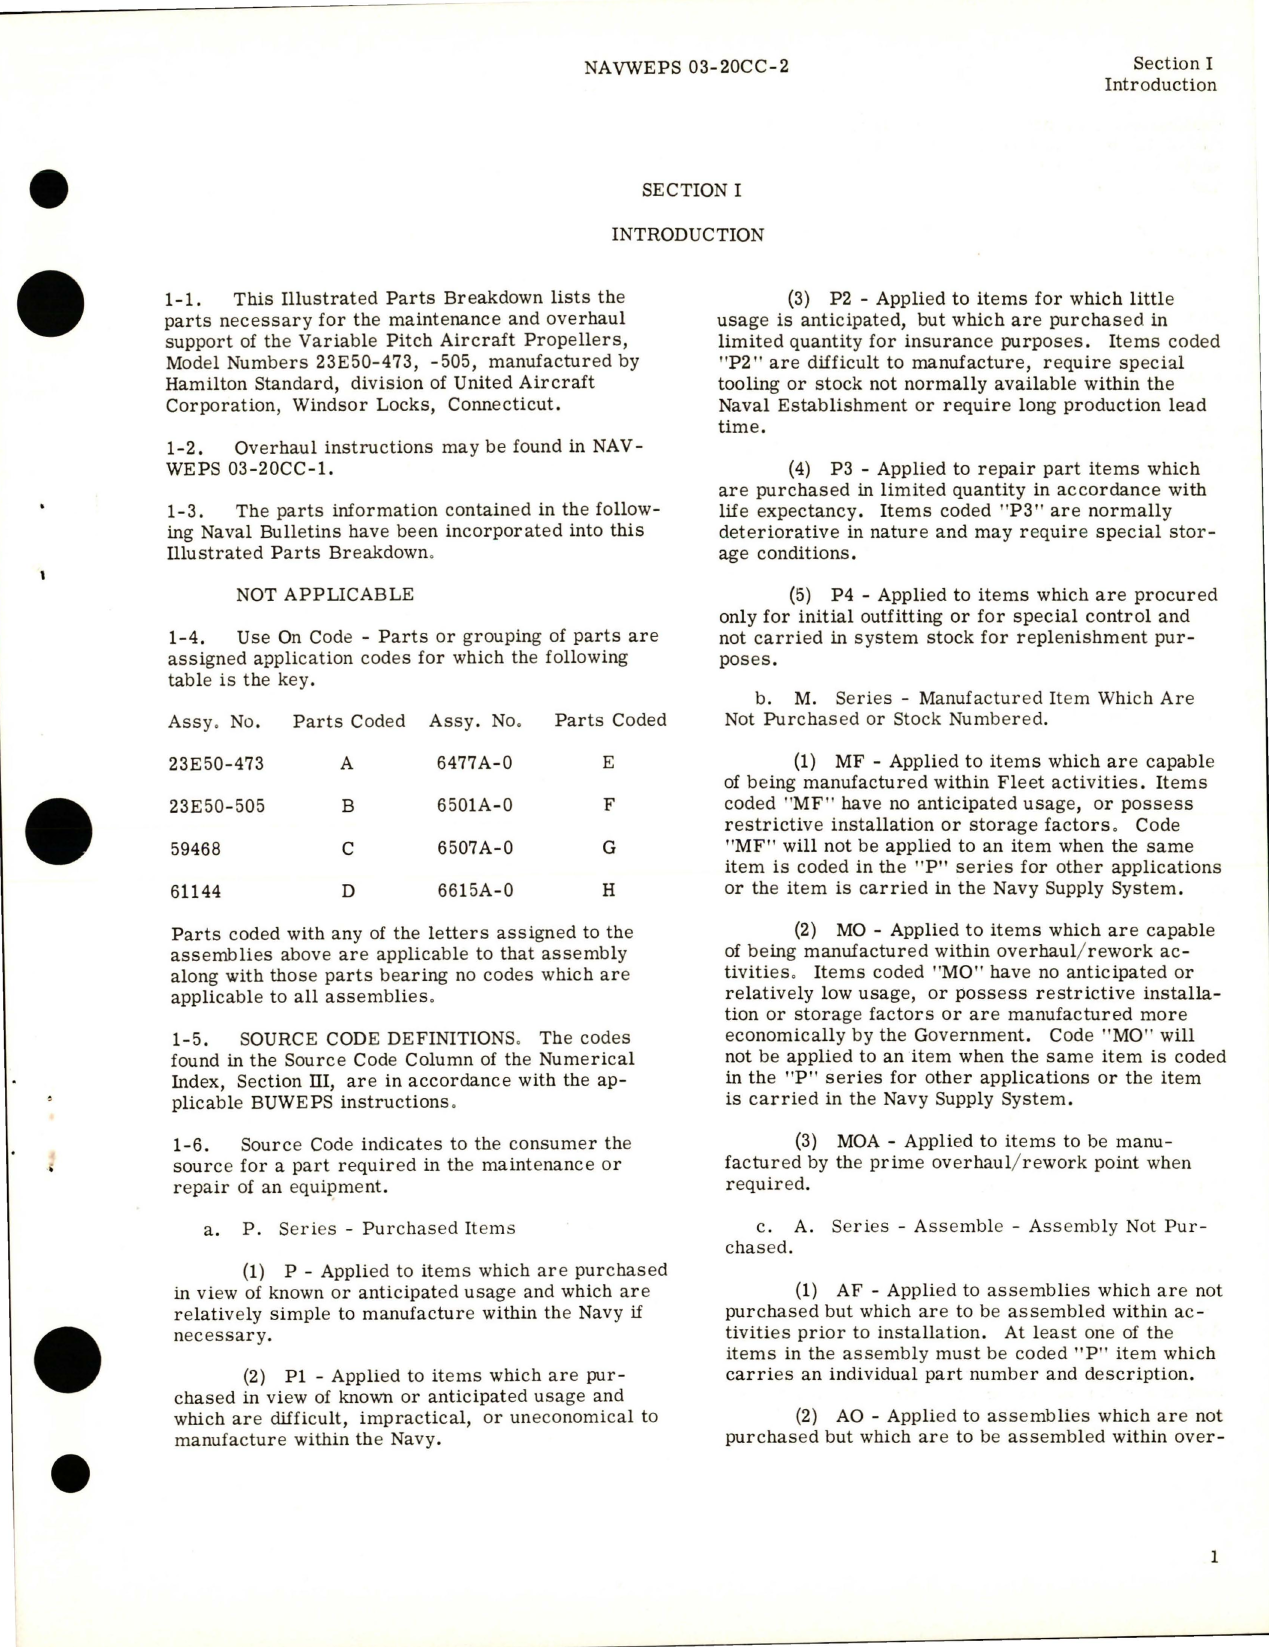 Sample page 5 from AirCorps Library document: Illustrated Parts for Variable Pitch Aircraft Propeller and Blade Assembly